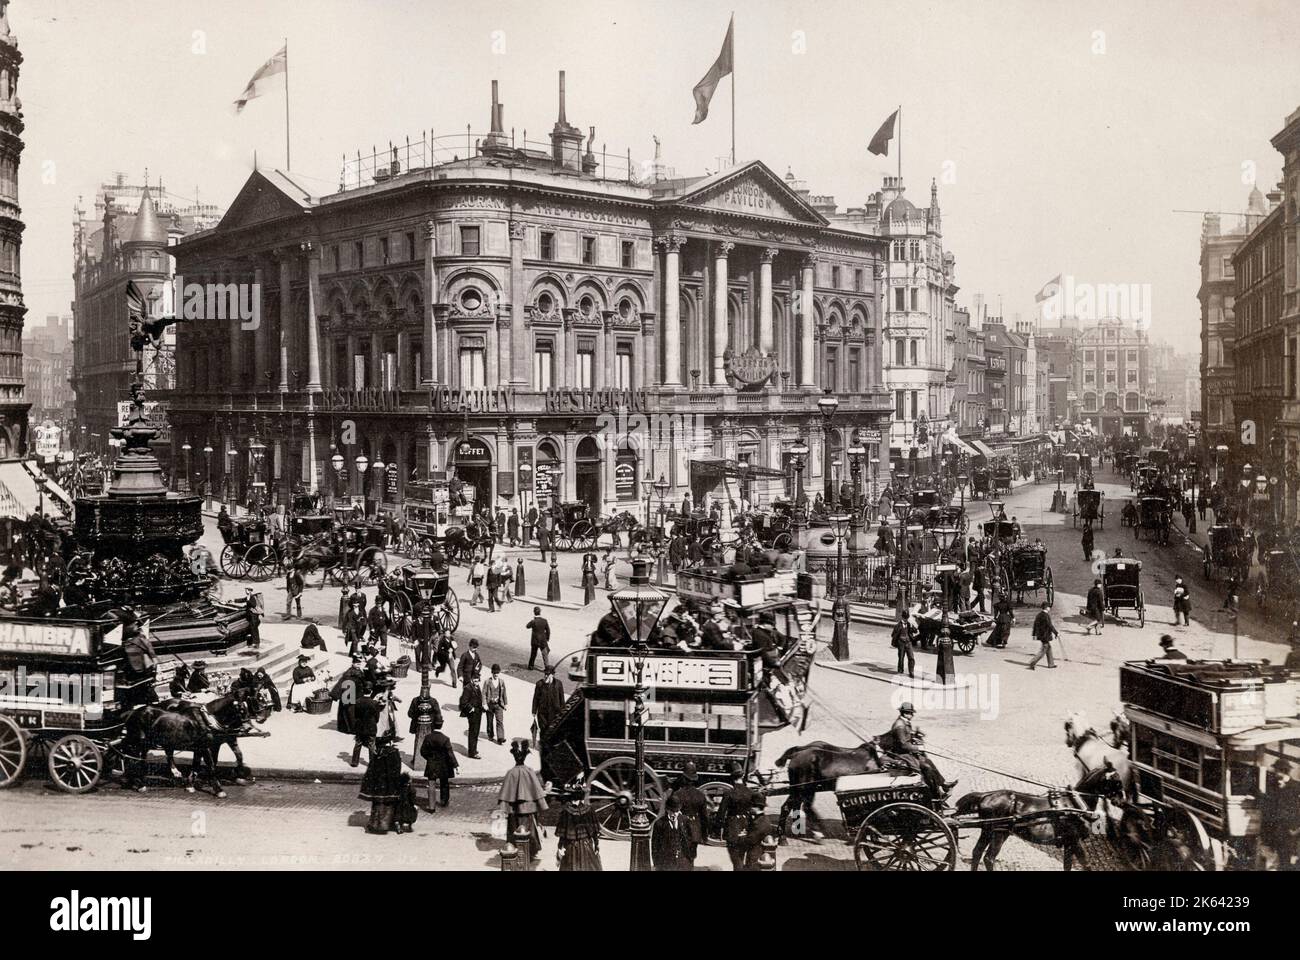 Vintage late 19th century photograph - Piccadilly Circus London. horse drawn and pedestrian transport. Stock Photo